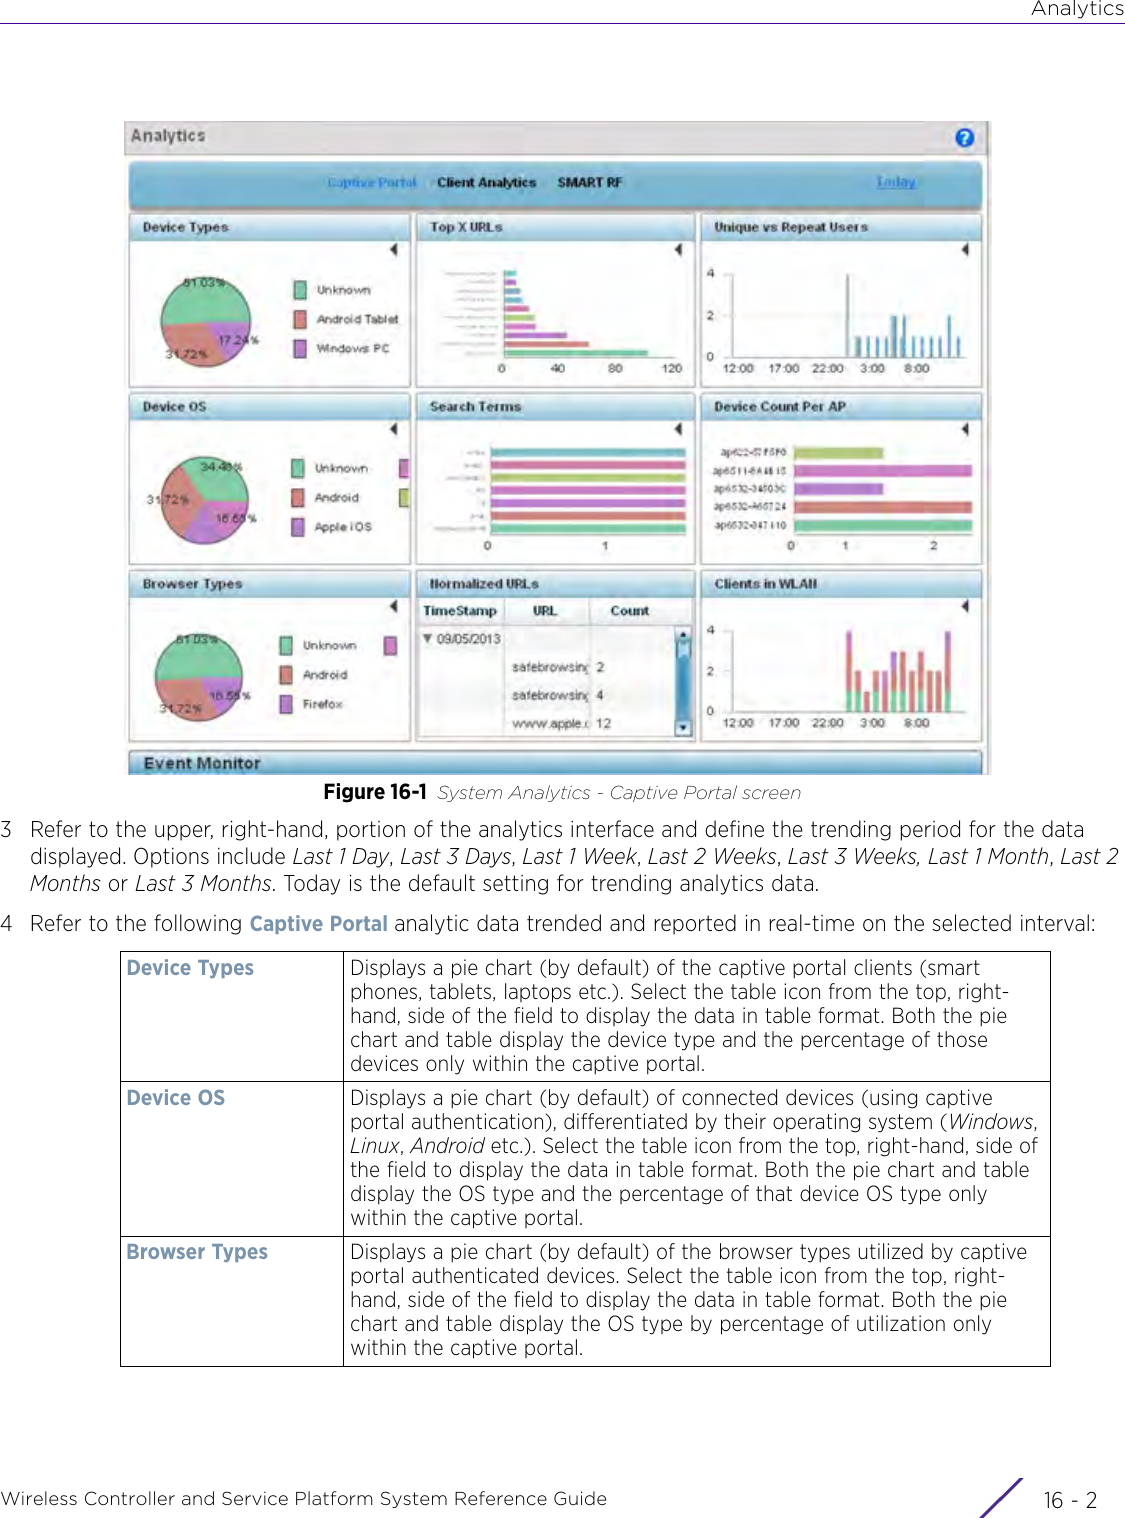 AnalyticsWireless Controller and Service Platform System Reference Guide  16 - 2Figure 16-1 System Analytics - Captive Portal screen3 Refer to the upper, right-hand, portion of the analytics interface and define the trending period for the data displayed. Options include Last 1 Day, Last 3 Days, Last 1 Week, Last 2 Weeks, Last 3 Weeks, Last 1 Month, Last 2 Months or Last 3 Months. Today is the default setting for trending analytics data.4 Refer to the following Captive Portal analytic data trended and reported in real-time on the selected interval:Device Types Displays a pie chart (by default) of the captive portal clients (smart phones, tablets, laptops etc.). Select the table icon from the top, right-hand, side of the field to display the data in table format. Both the pie chart and table display the device type and the percentage of those devices only within the captive portal. Device OS Displays a pie chart (by default) of connected devices (using captive portal authentication), differentiated by their operating system (Windows, Linux, Android etc.). Select the table icon from the top, right-hand, side of the field to display the data in table format. Both the pie chart and table display the OS type and the percentage of that device OS type only within the captive portal.Browser Types Displays a pie chart (by default) of the browser types utilized by captive portal authenticated devices. Select the table icon from the top, right-hand, side of the field to display the data in table format. Both the pie chart and table display the OS type by percentage of utilization only within the captive portal.